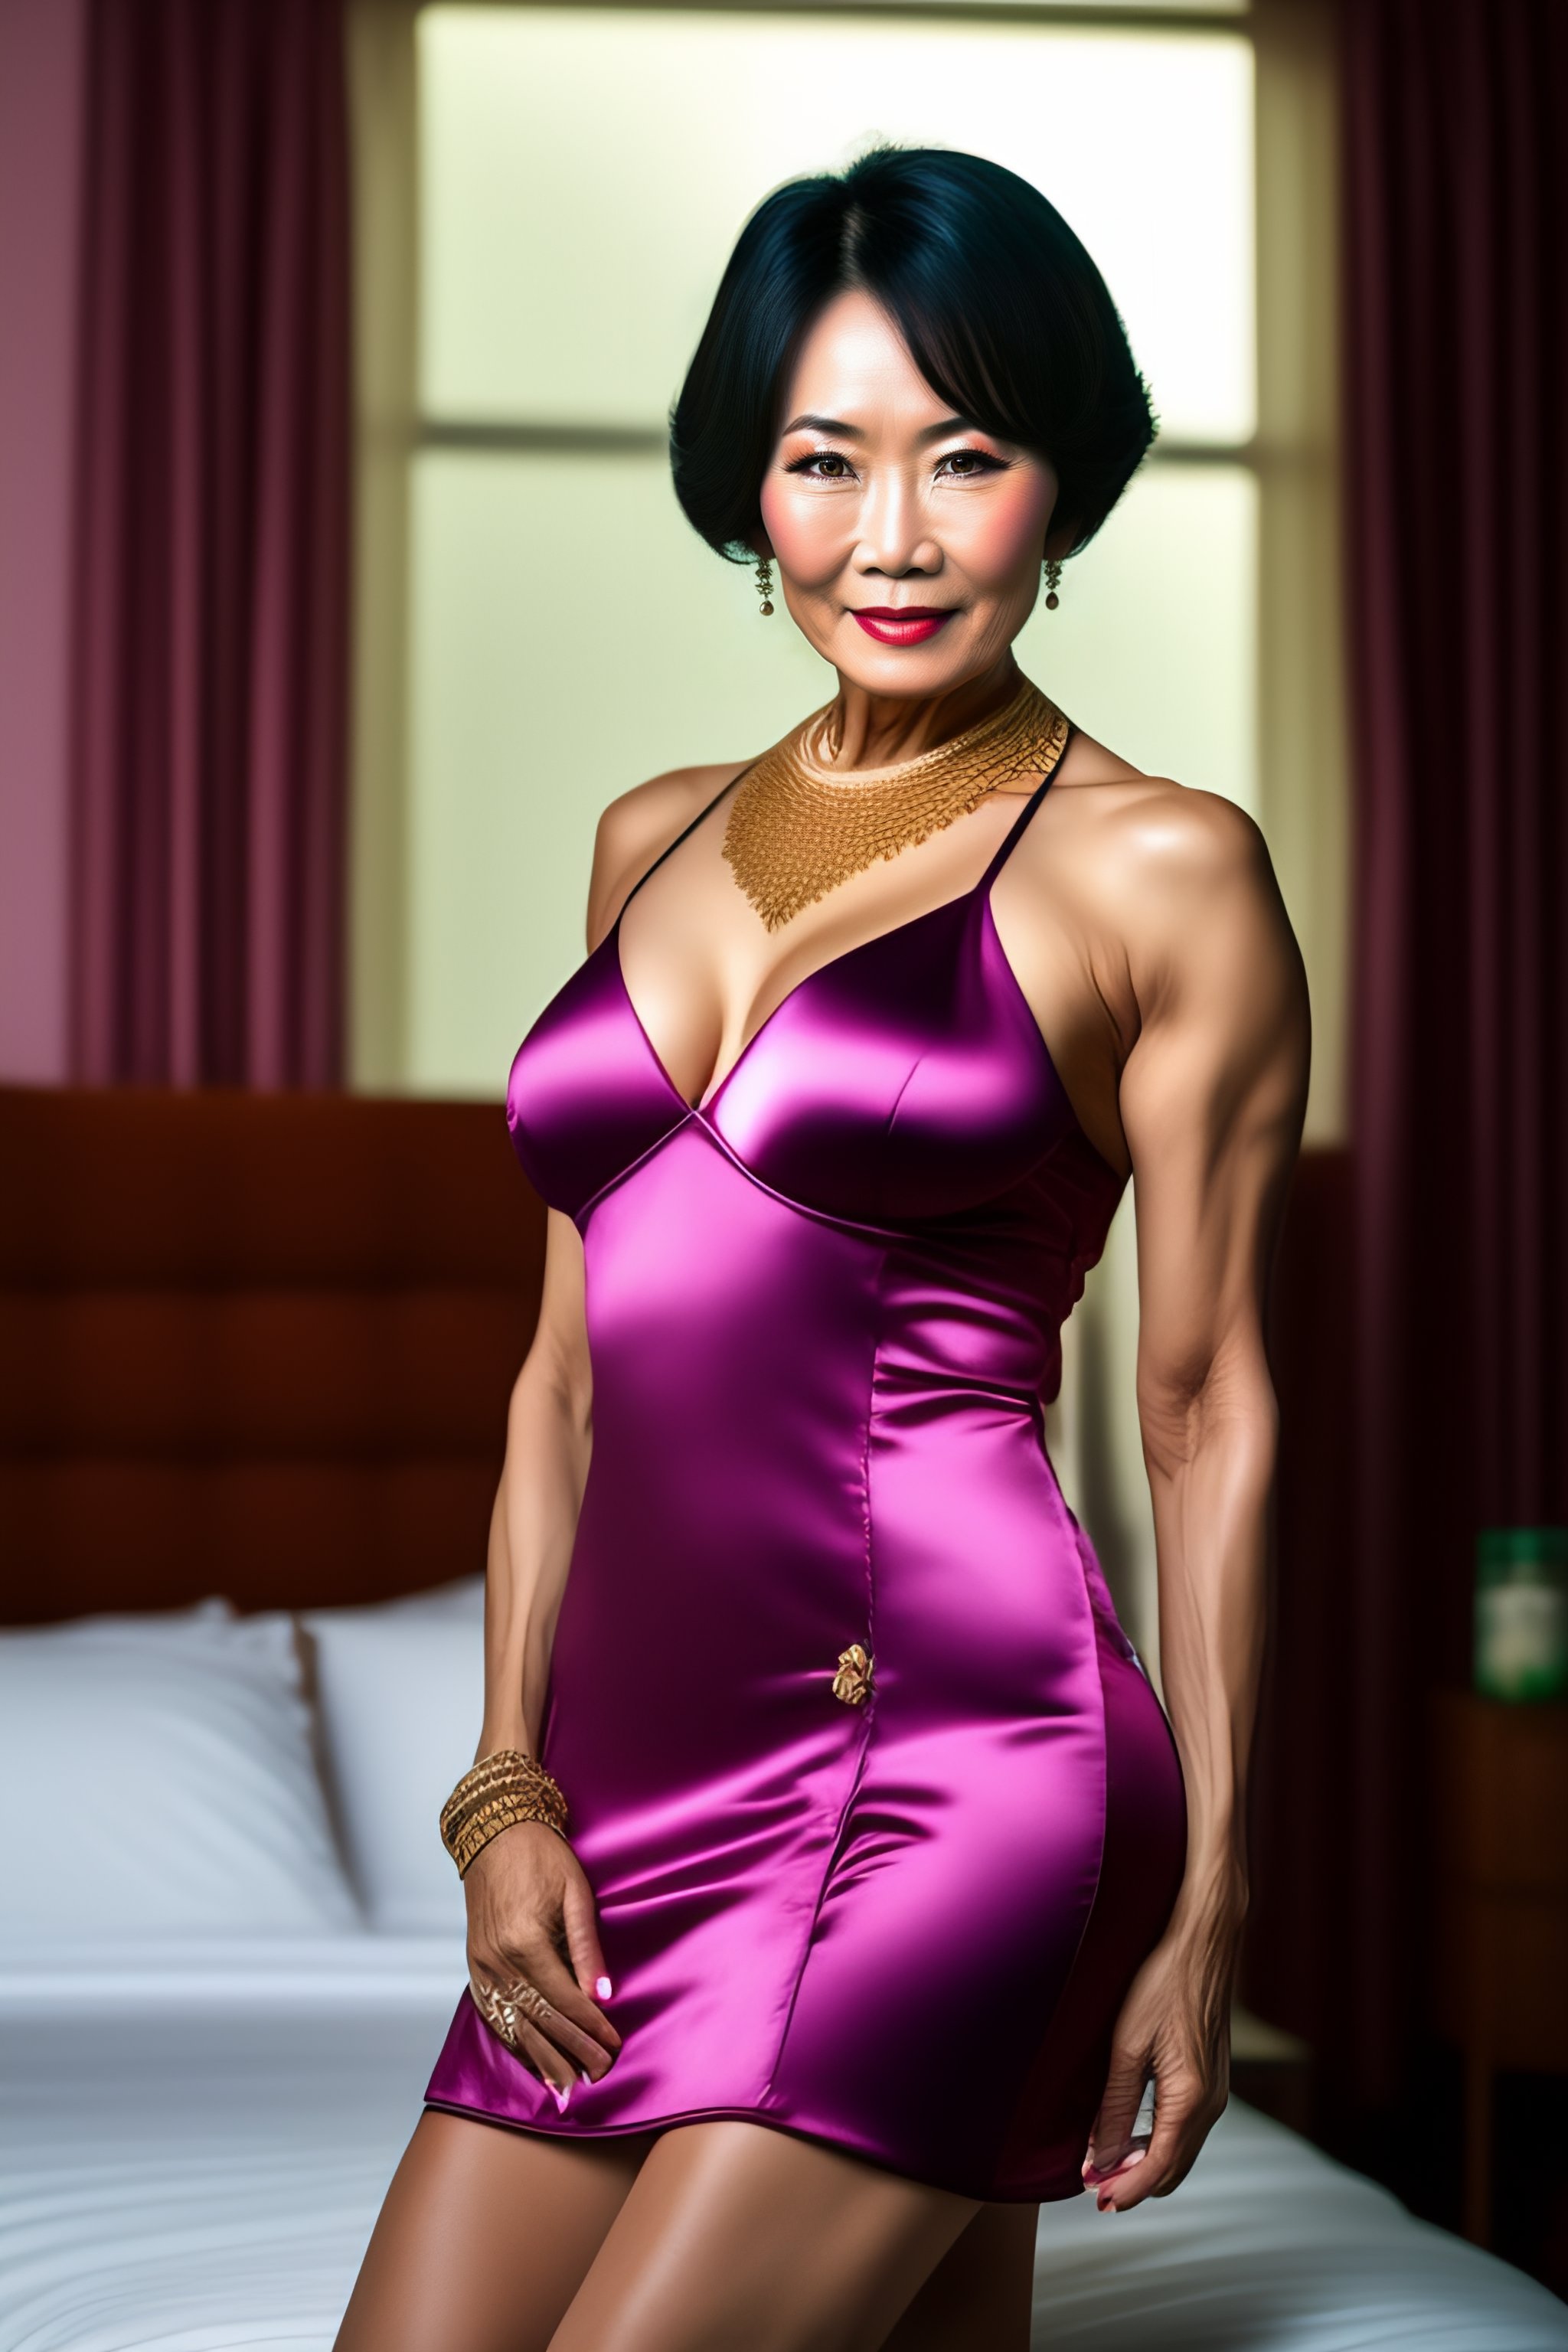 alan rogers recommends hot asian mature pic